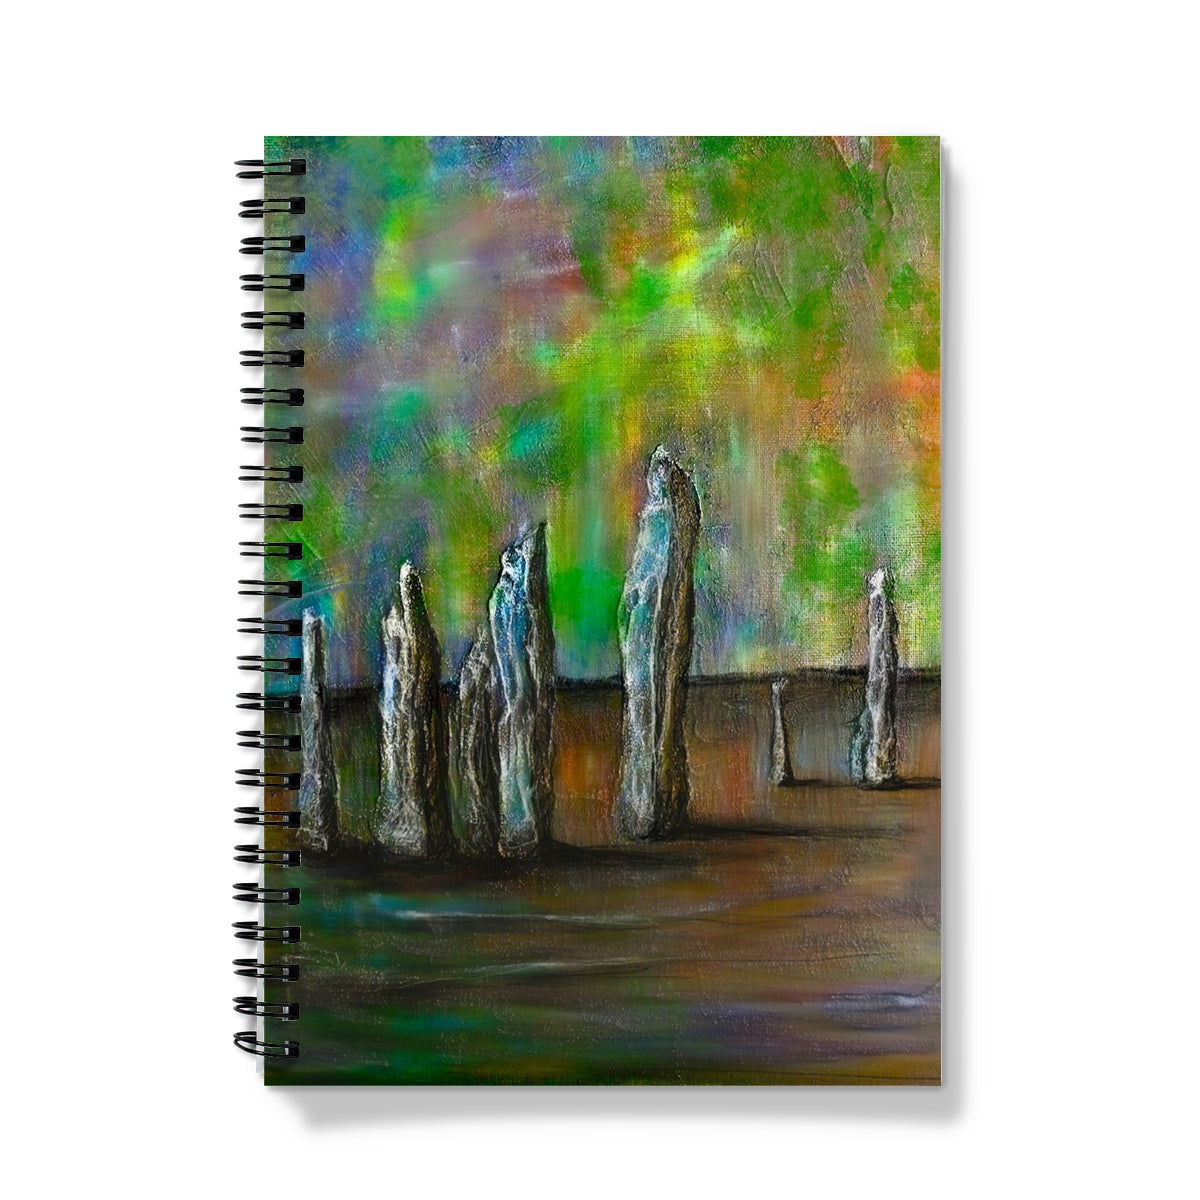 Callanish Northern Lights Art Gifts Notebook-Journals & Notebooks-Hebridean Islands Art Gallery-A4-Lined-Paintings, Prints, Homeware, Art Gifts From Scotland By Scottish Artist Kevin Hunter